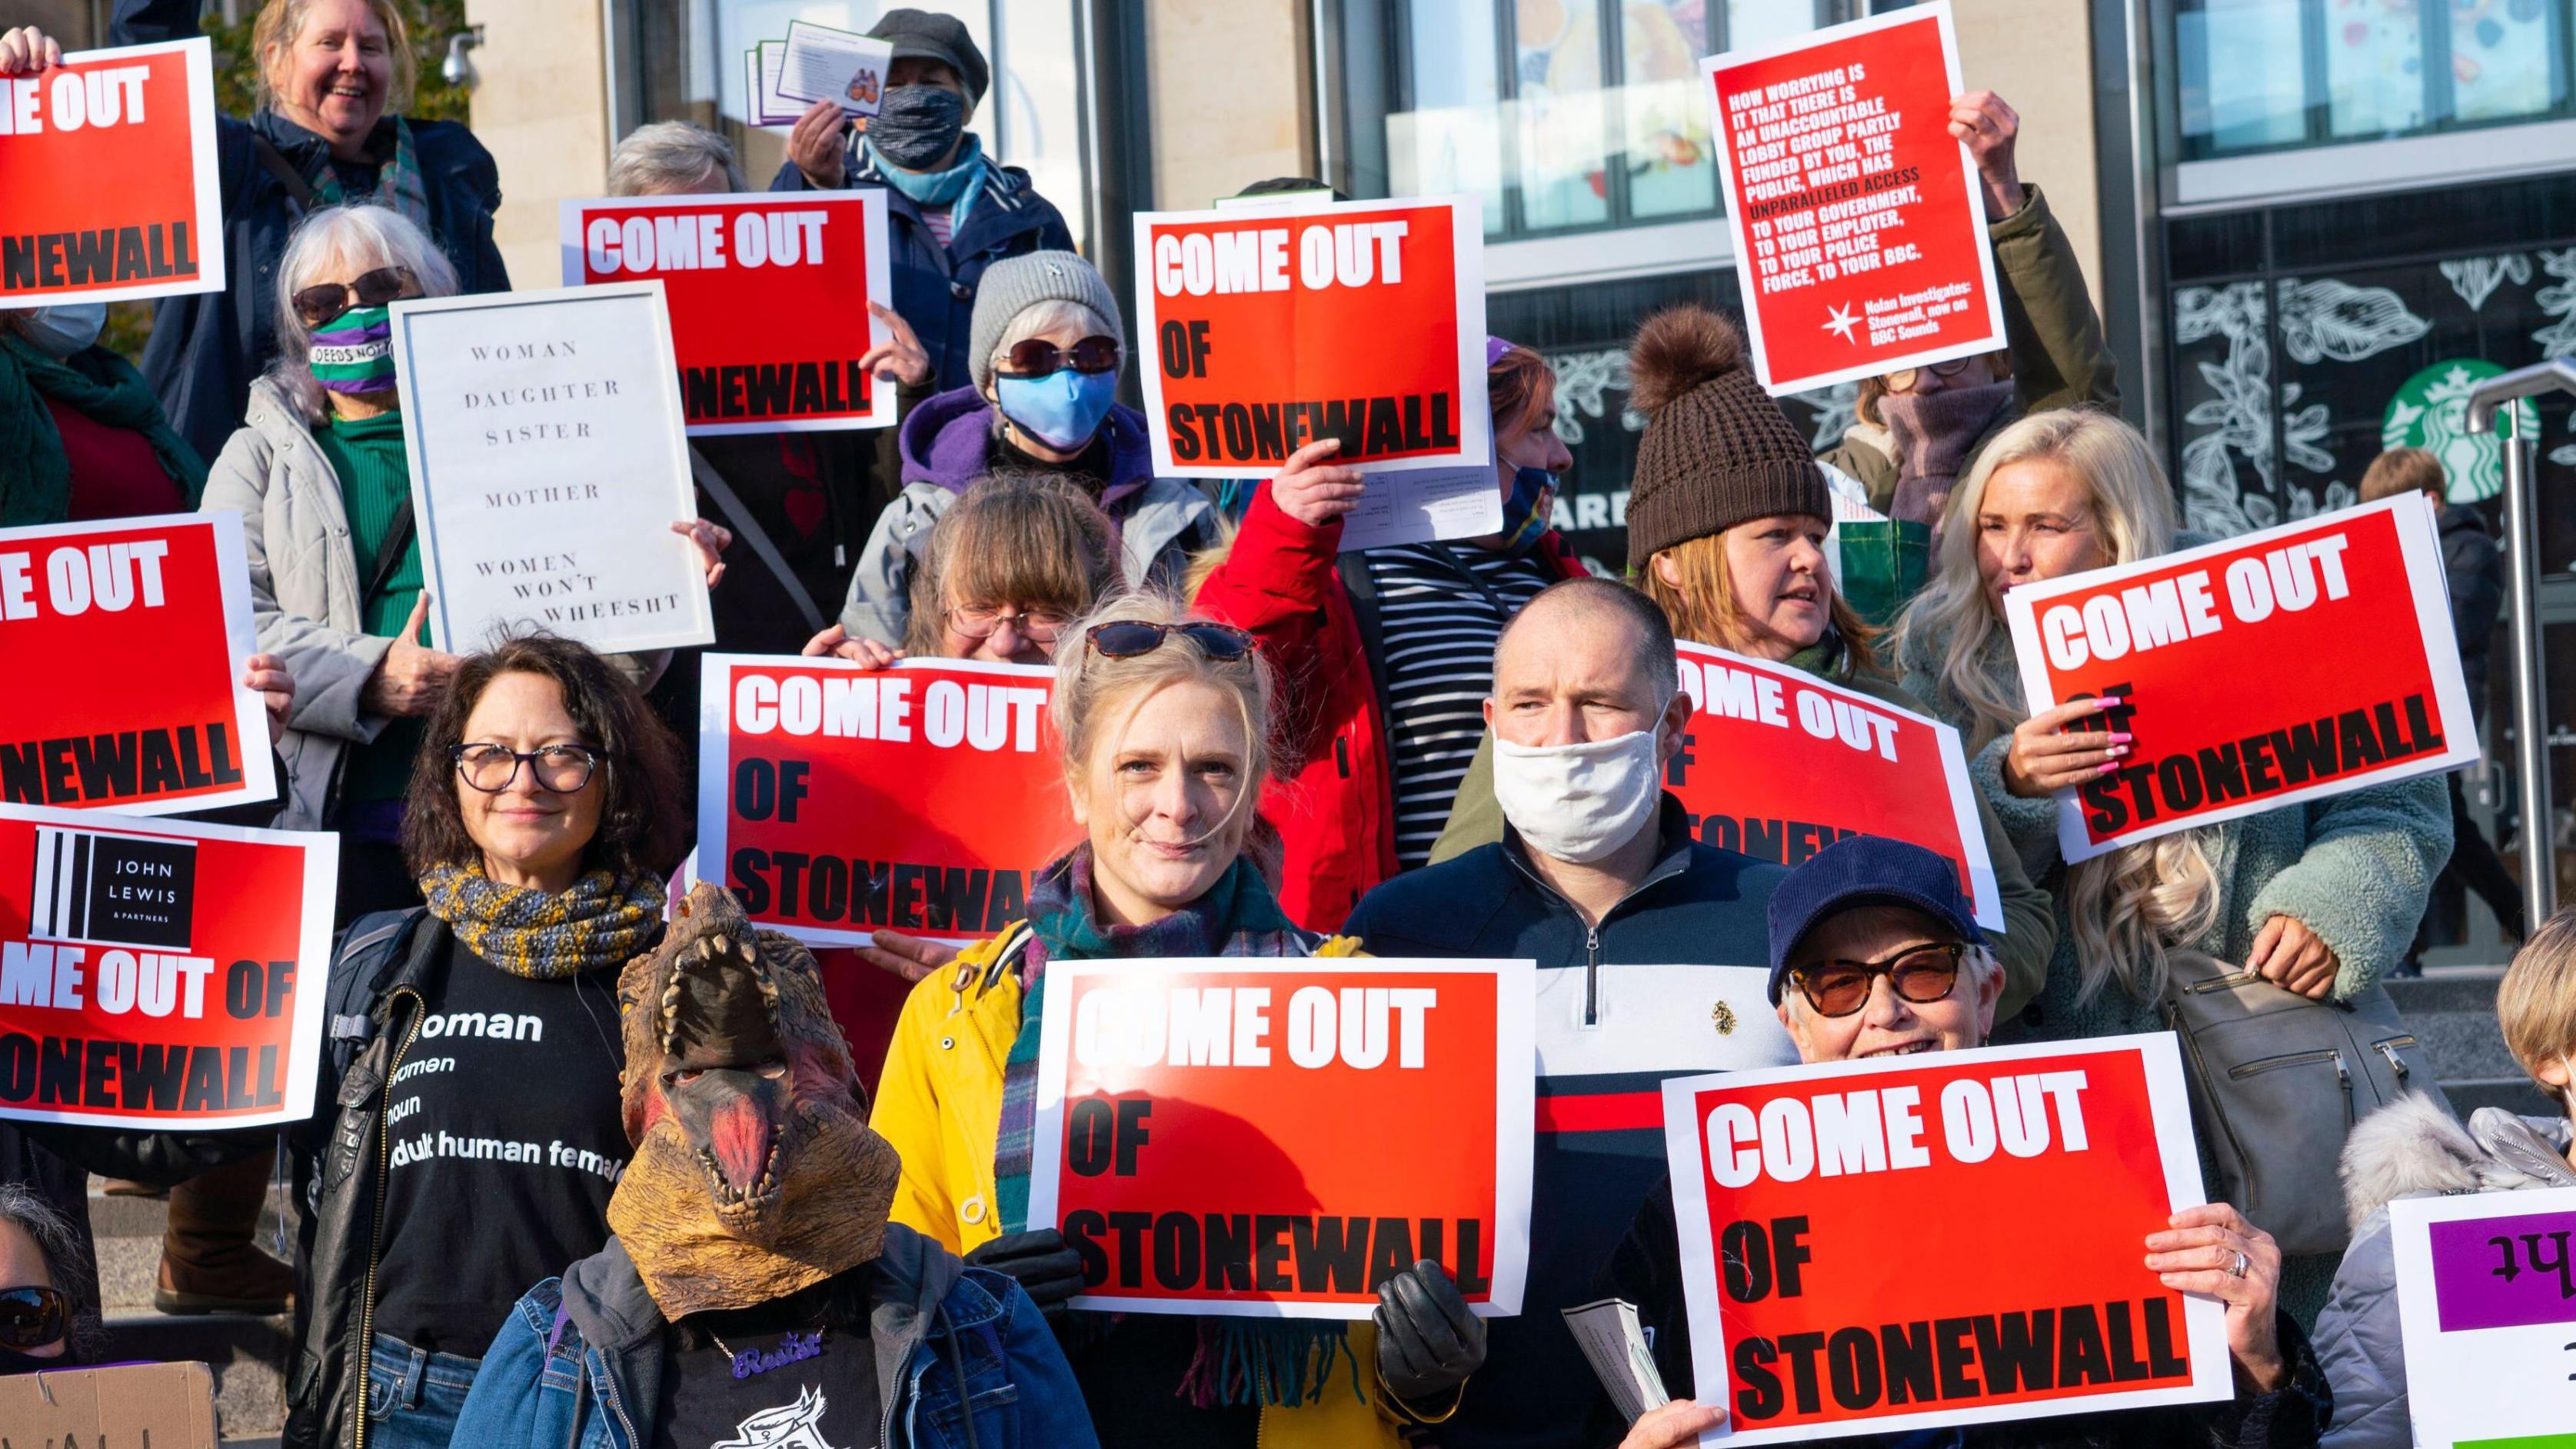 In October 2021, a demonstration was held outside NHS Scotland offices and a John Lewis shop in Edinburgh against their involvement with Stonewall